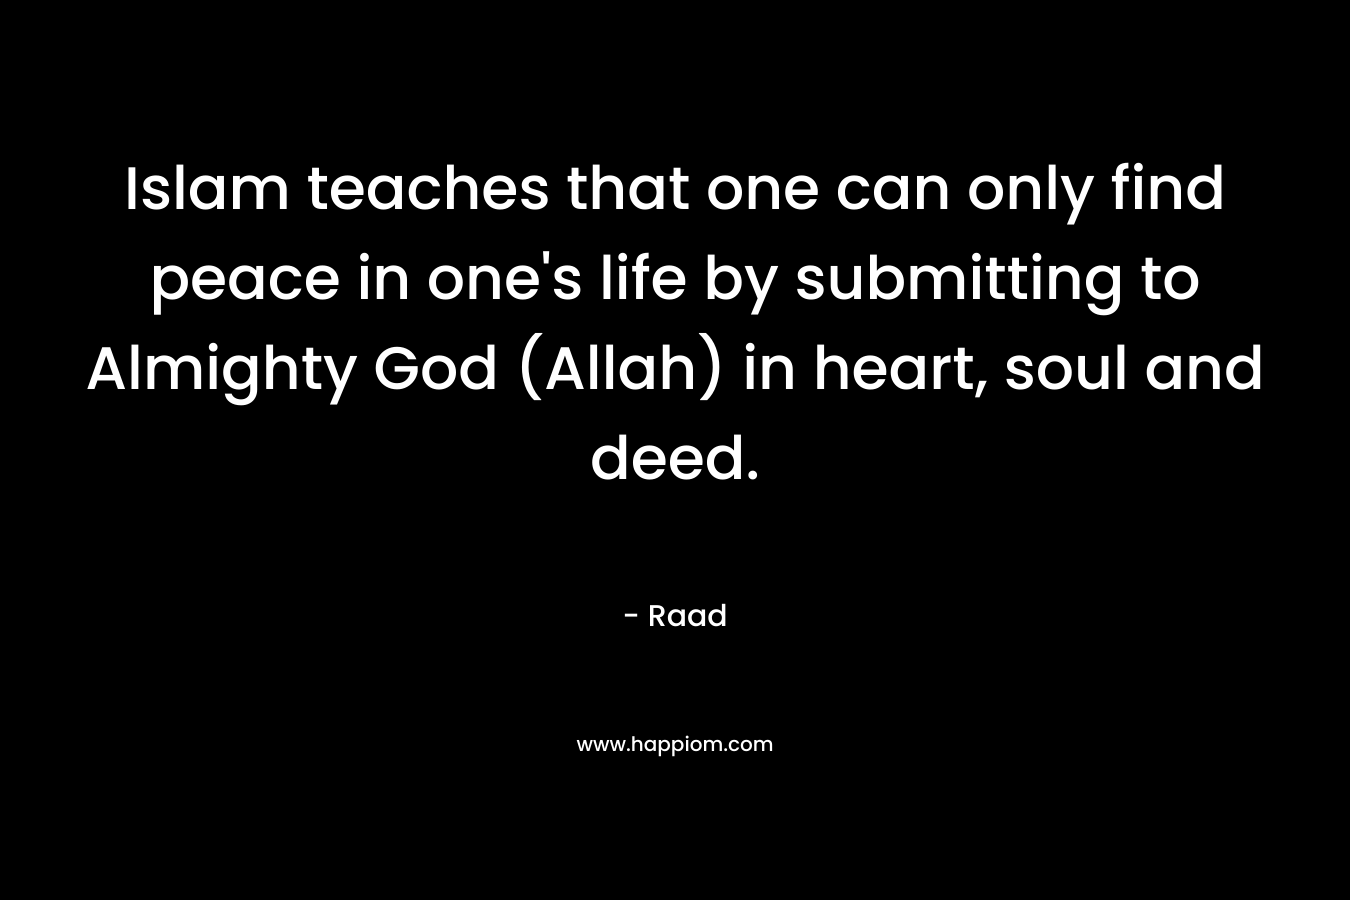 Islam teaches that one can only find peace in one’s life by submitting to Almighty God (Allah) in heart, soul and deed. – Raad